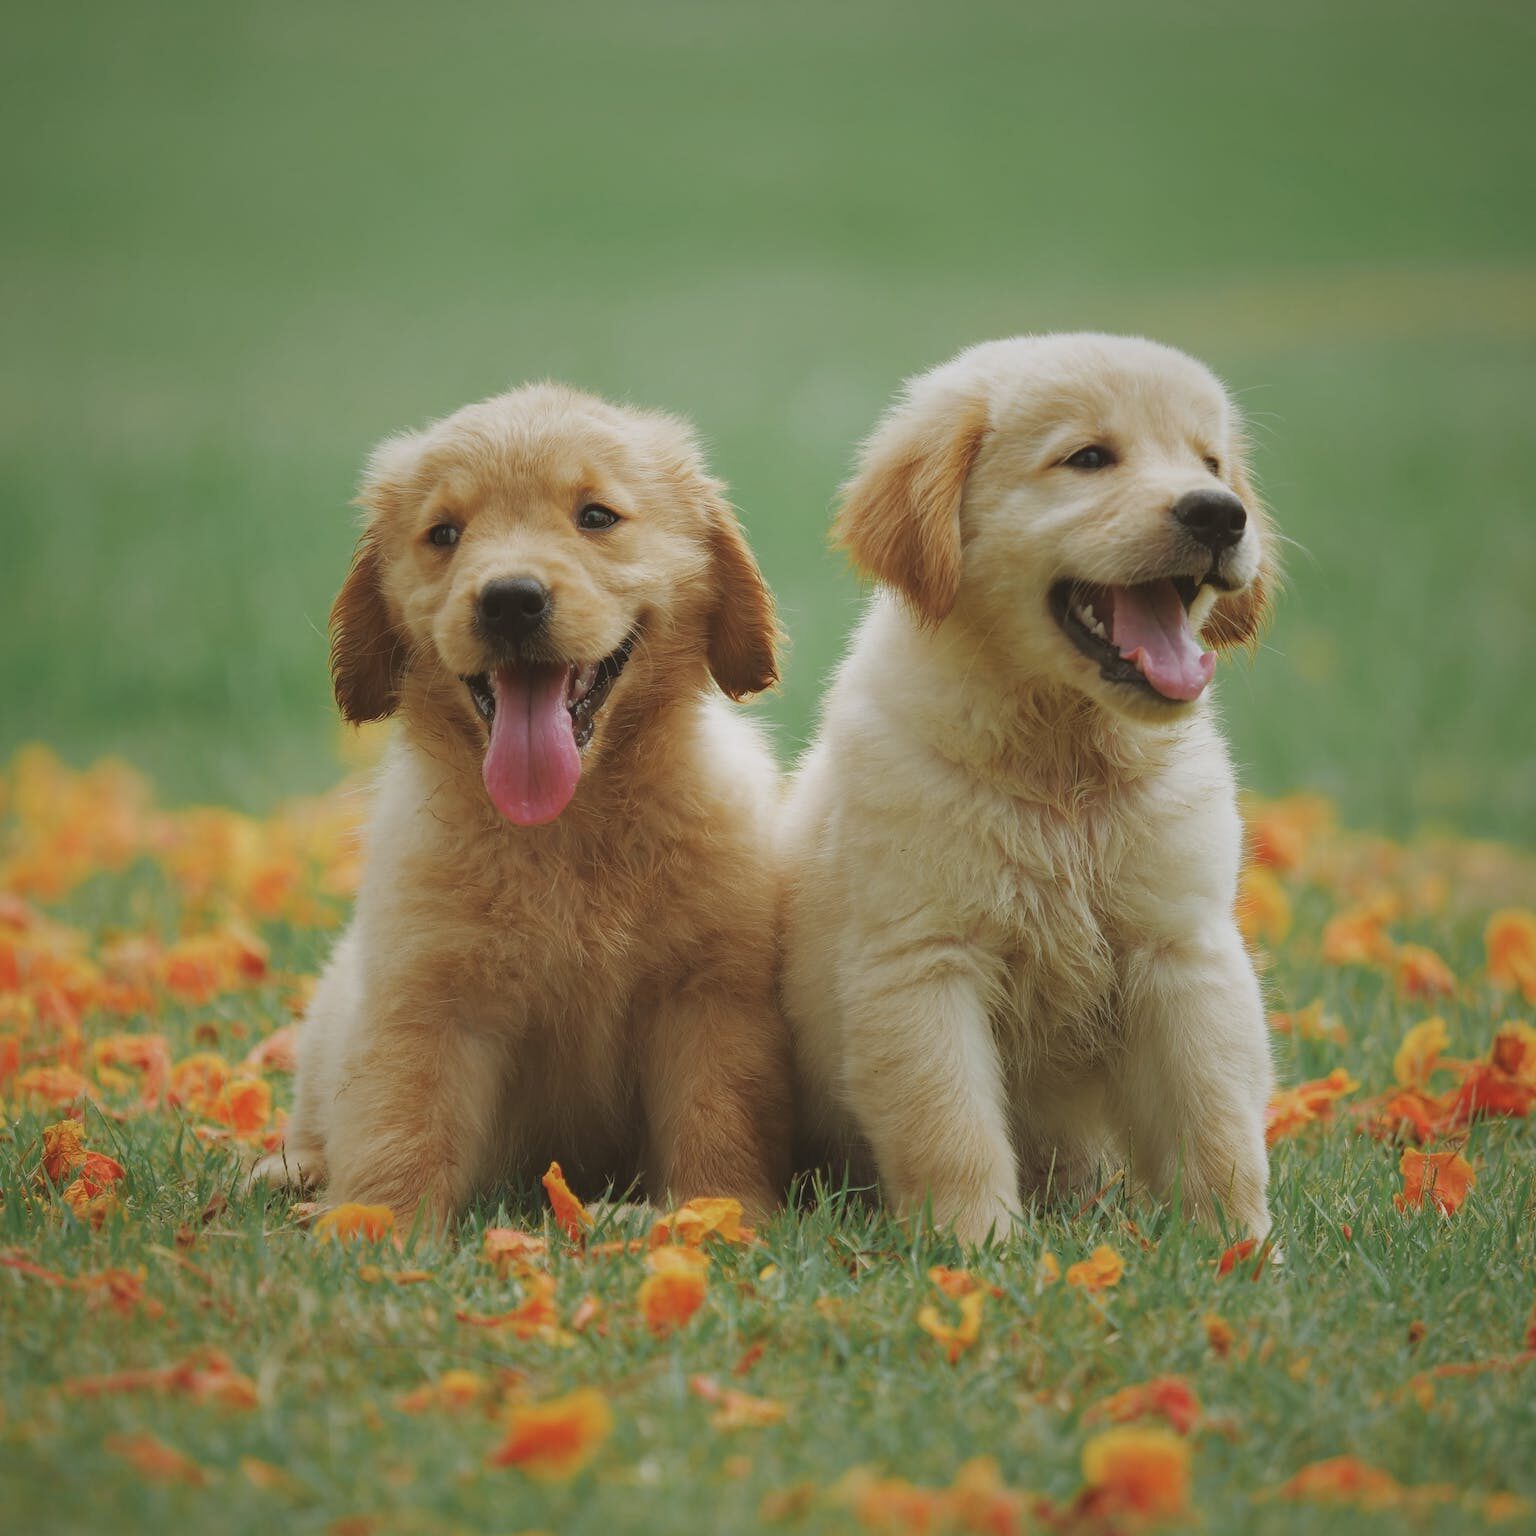 Two yellow puppies sitting a field of yellow flowers. 